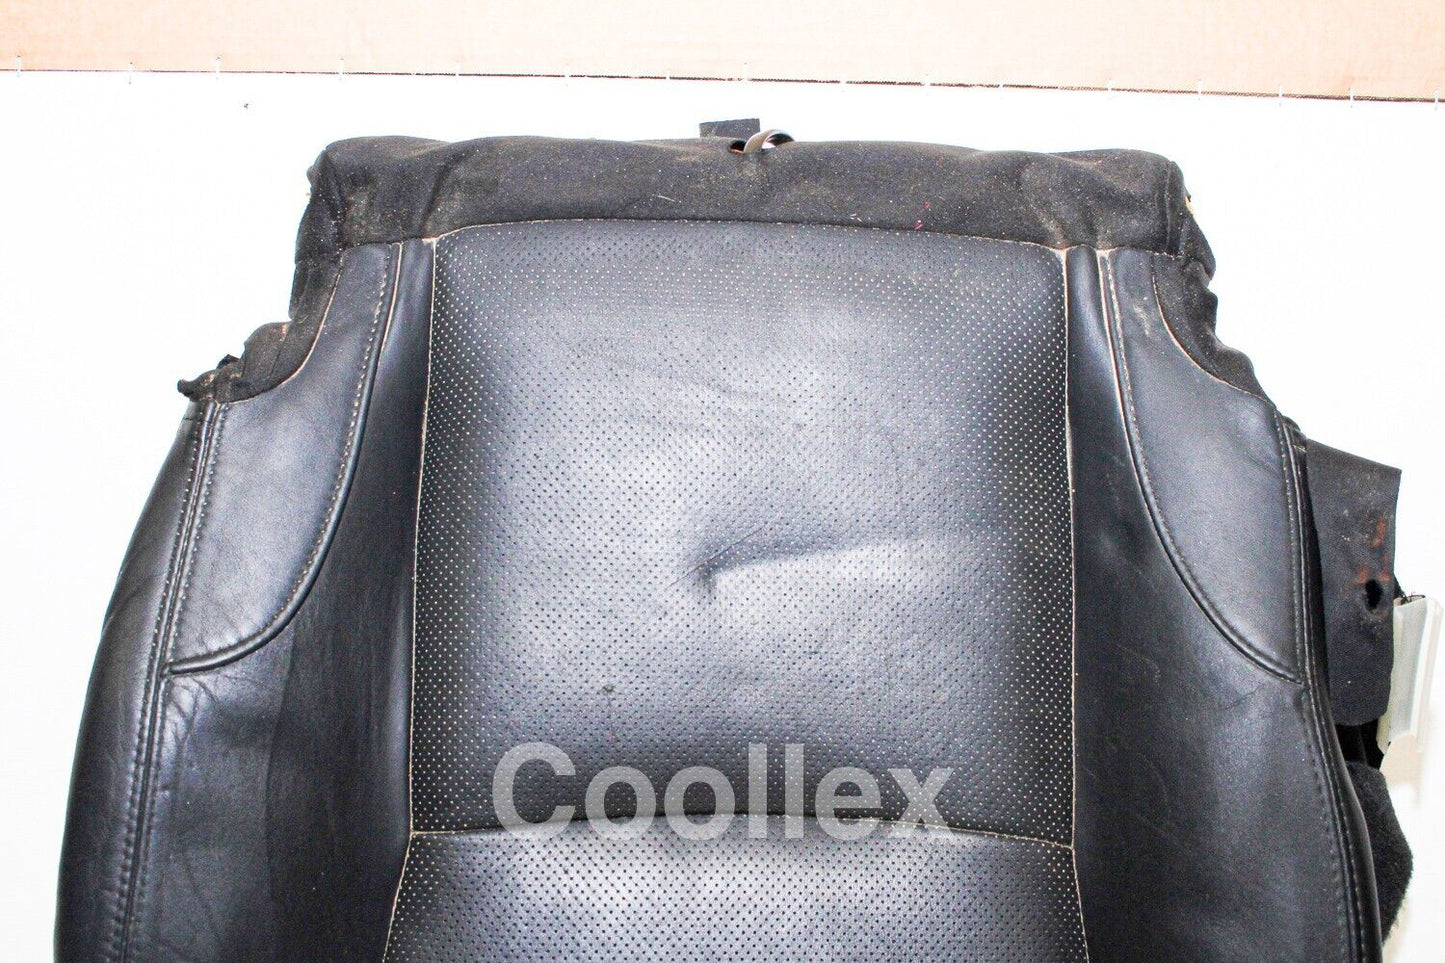 07-09 Lexus Is250 Awd Front Right Lower Seat Cushion Black 71001-53K02-C0 Oem